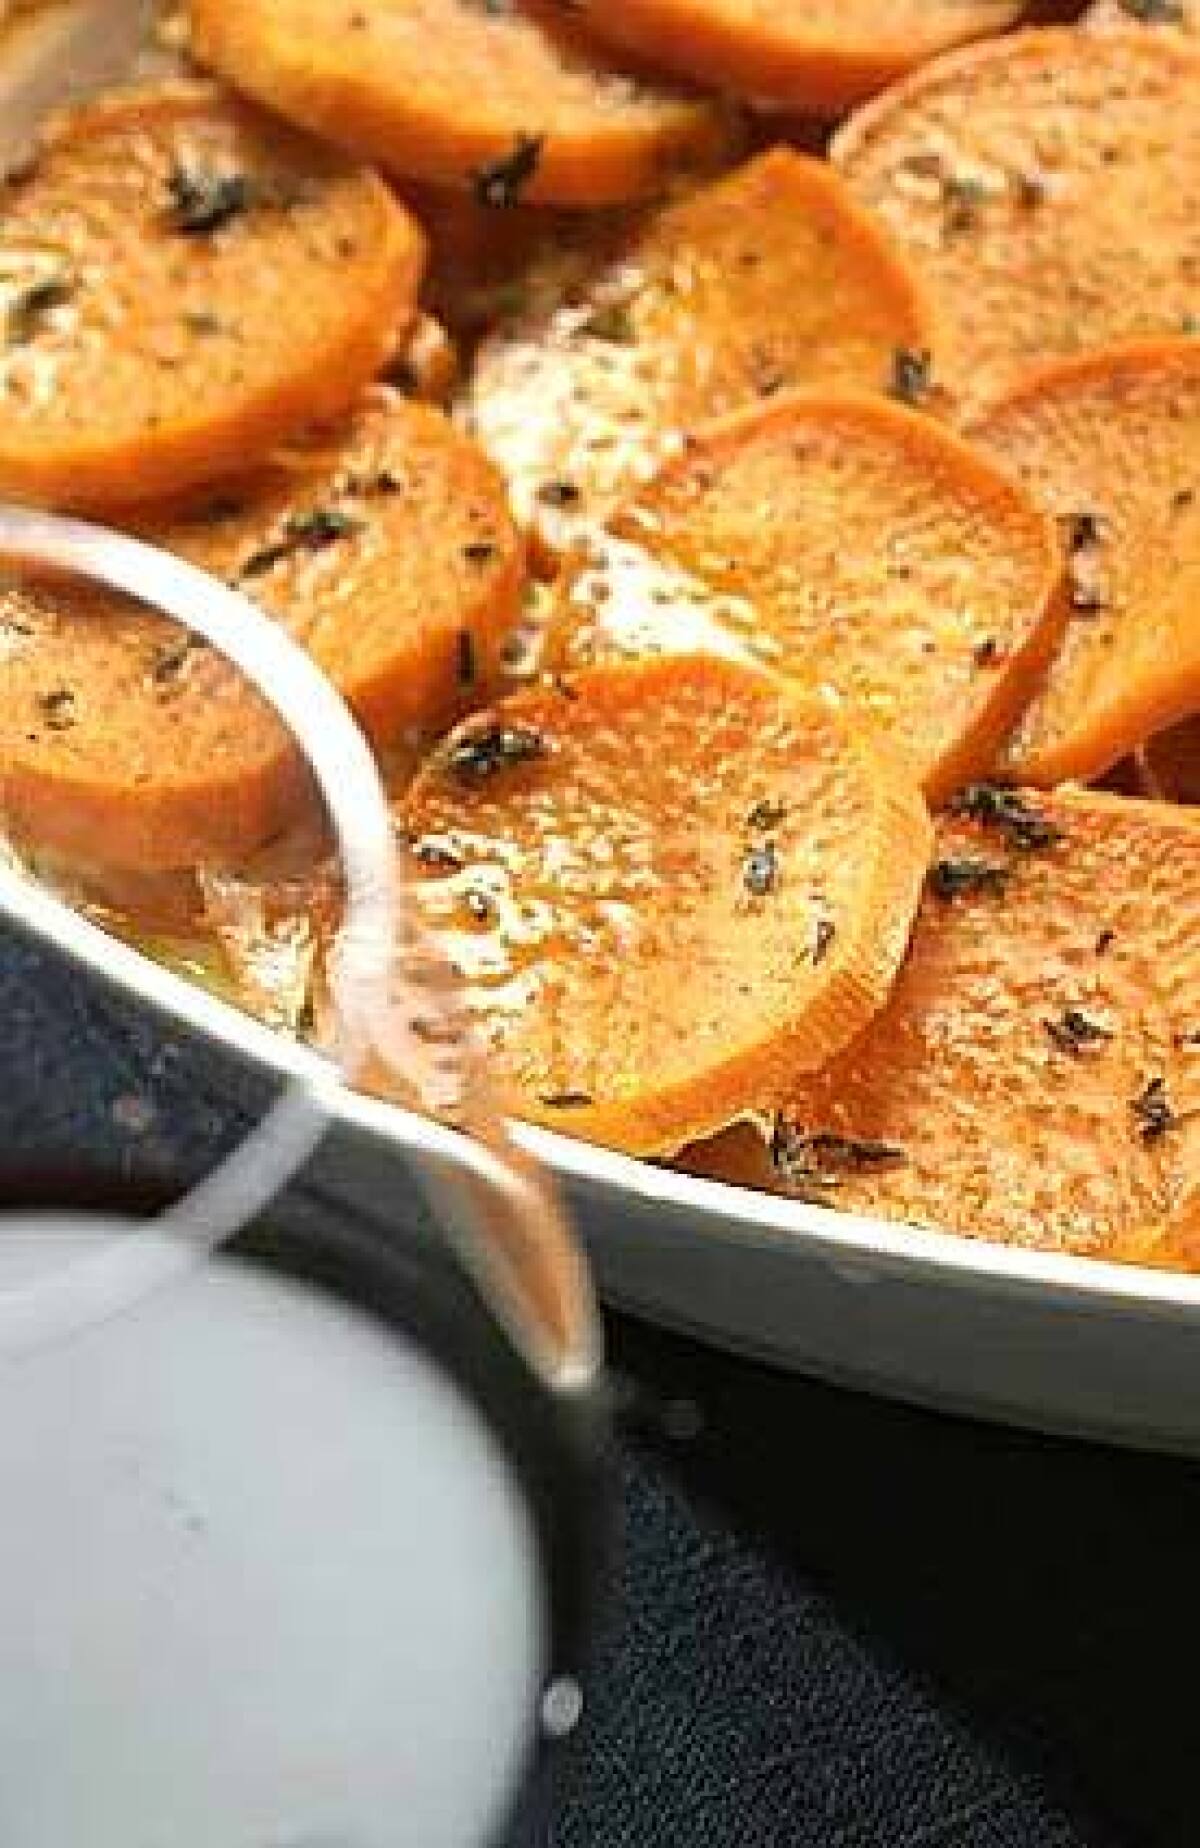 Serve both sweet potato gratin and mashed potatoes. This is the one day of the year you can really starch it up.